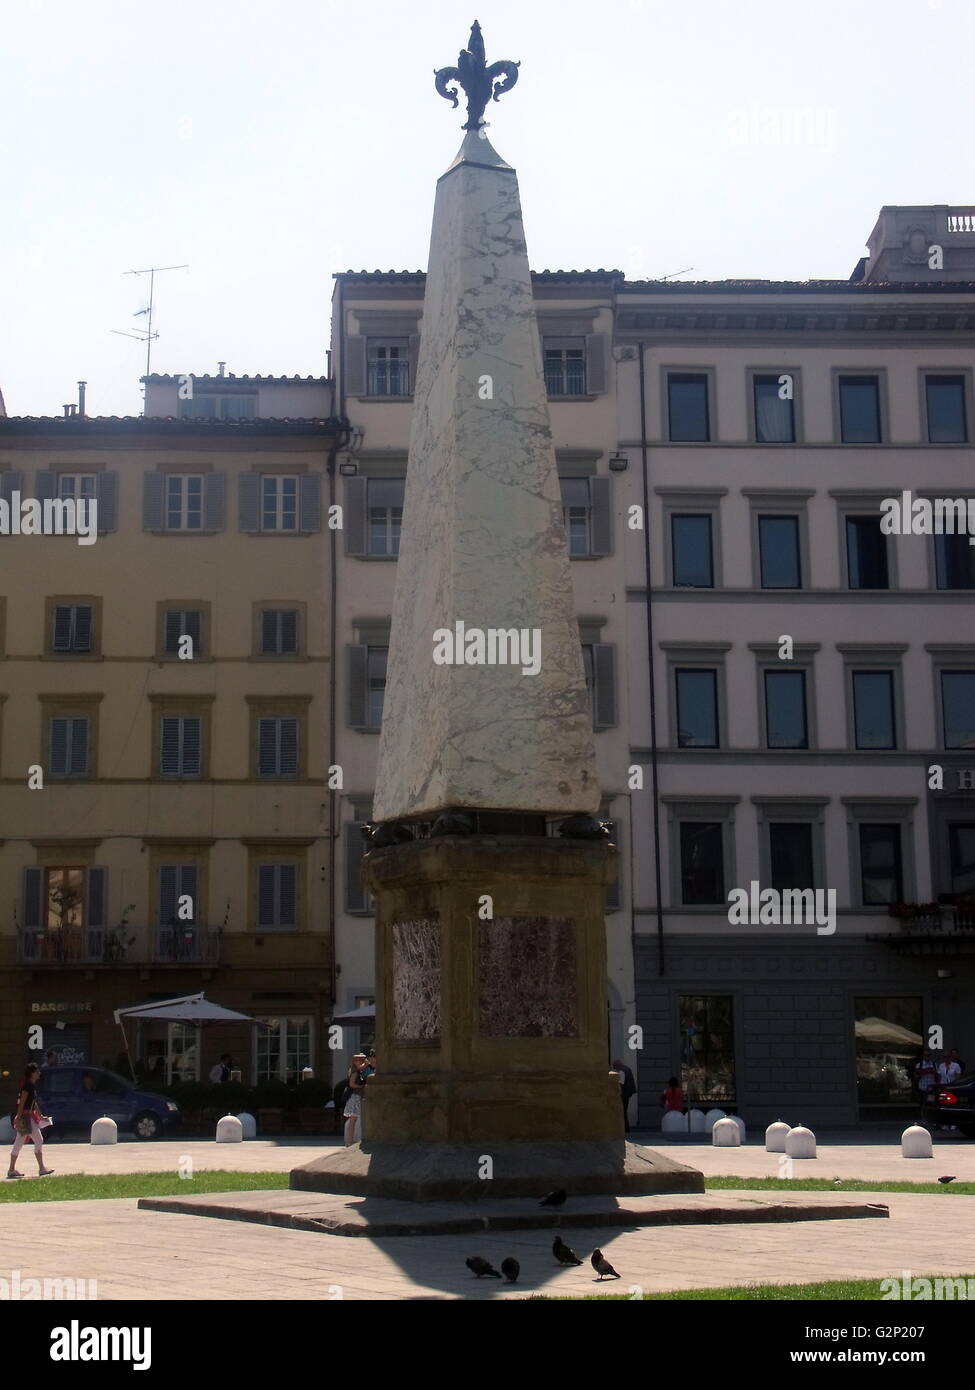 The Obelisk at Santa Maria Novella. Florence, Italy. An obelisk is a tall, four-sided narrow tapering monument, which ends in a pyramid shaped point on top. This marble obelisk stands atop 4 sculpted turtles on a platform. Stock Photo